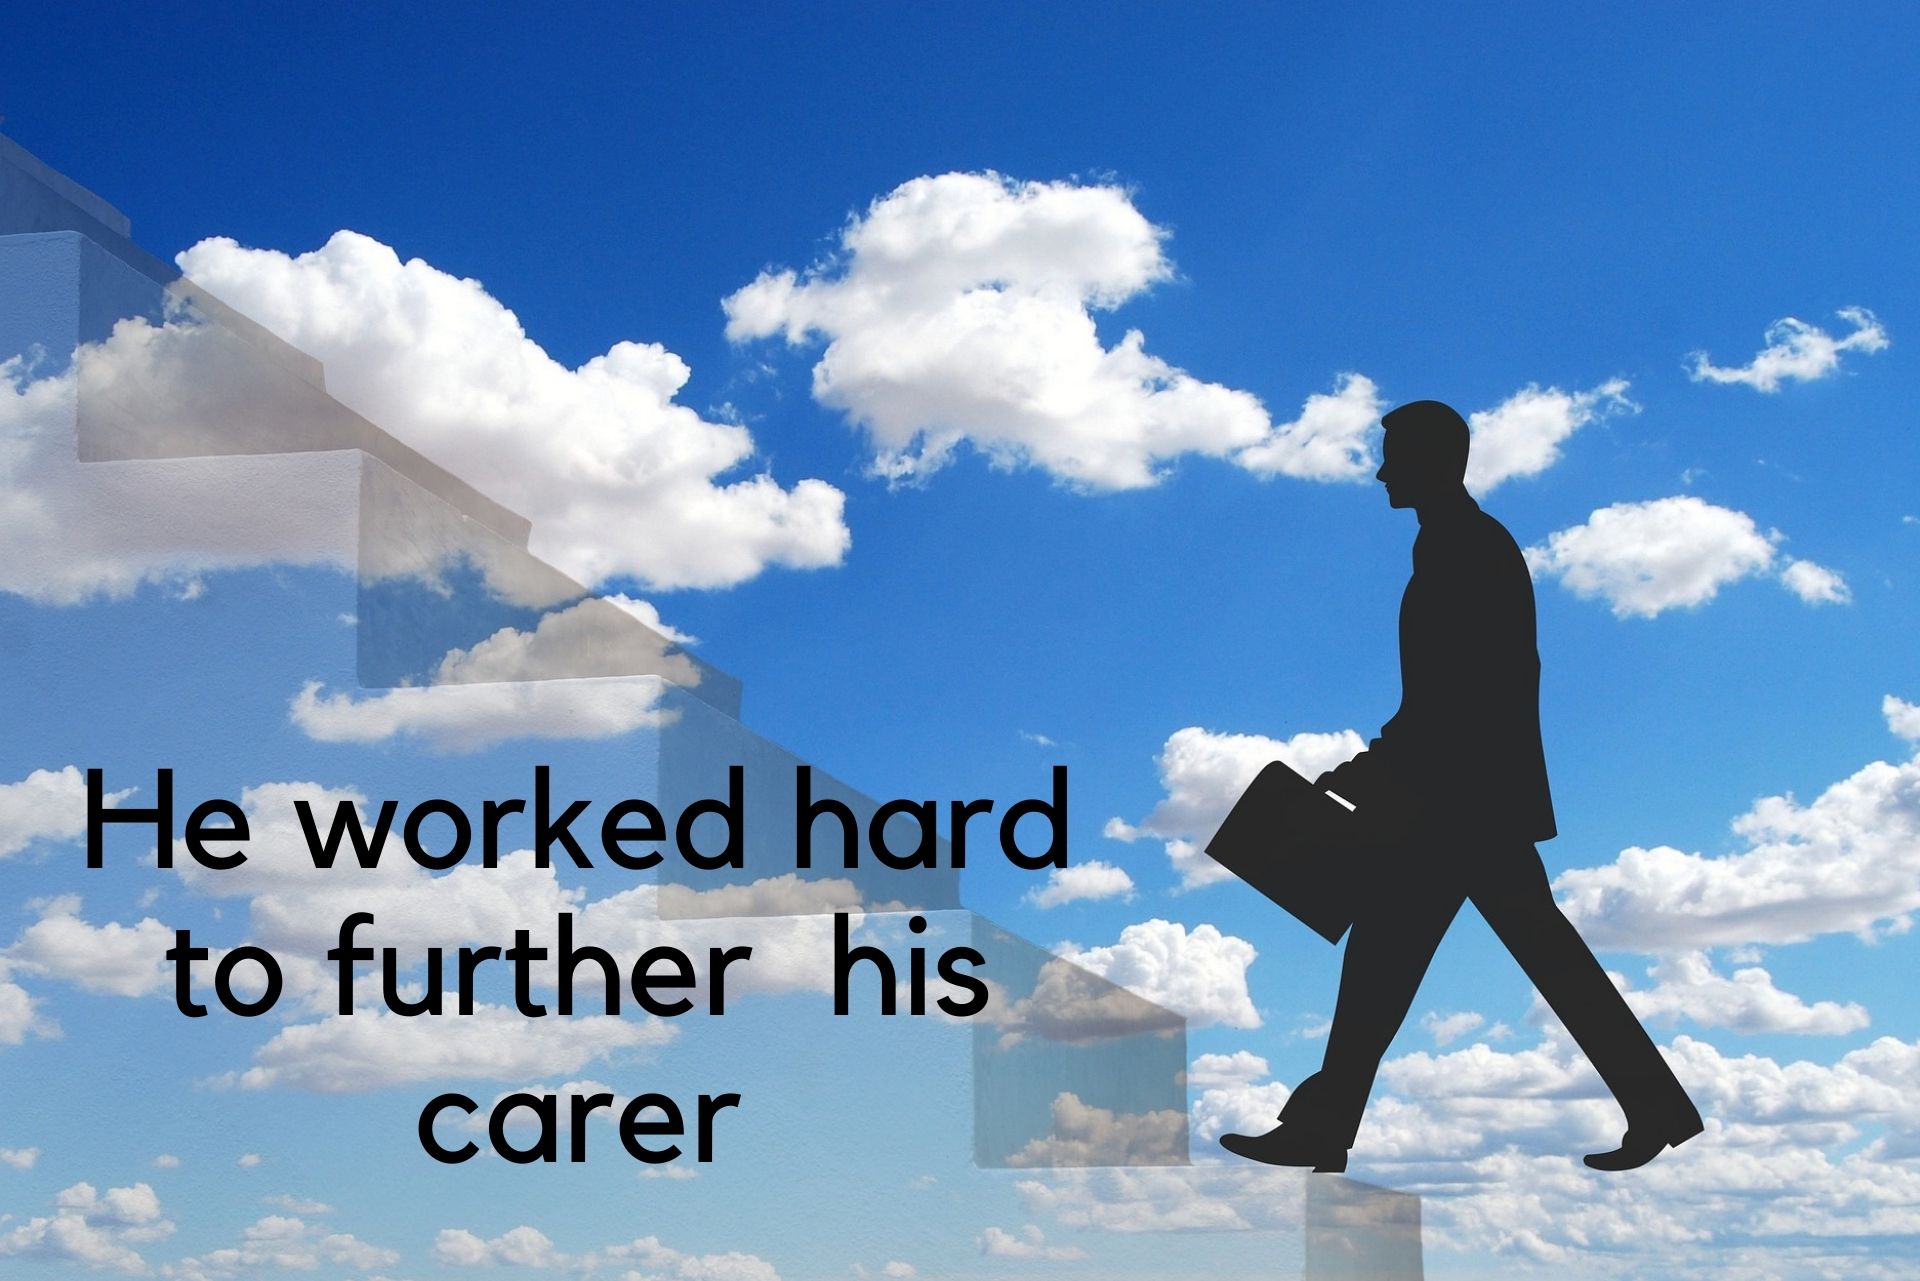 Explaining farther vs. further: graphic showing a man climbing up a figurative stairs with caption "he worked hard to further his career"